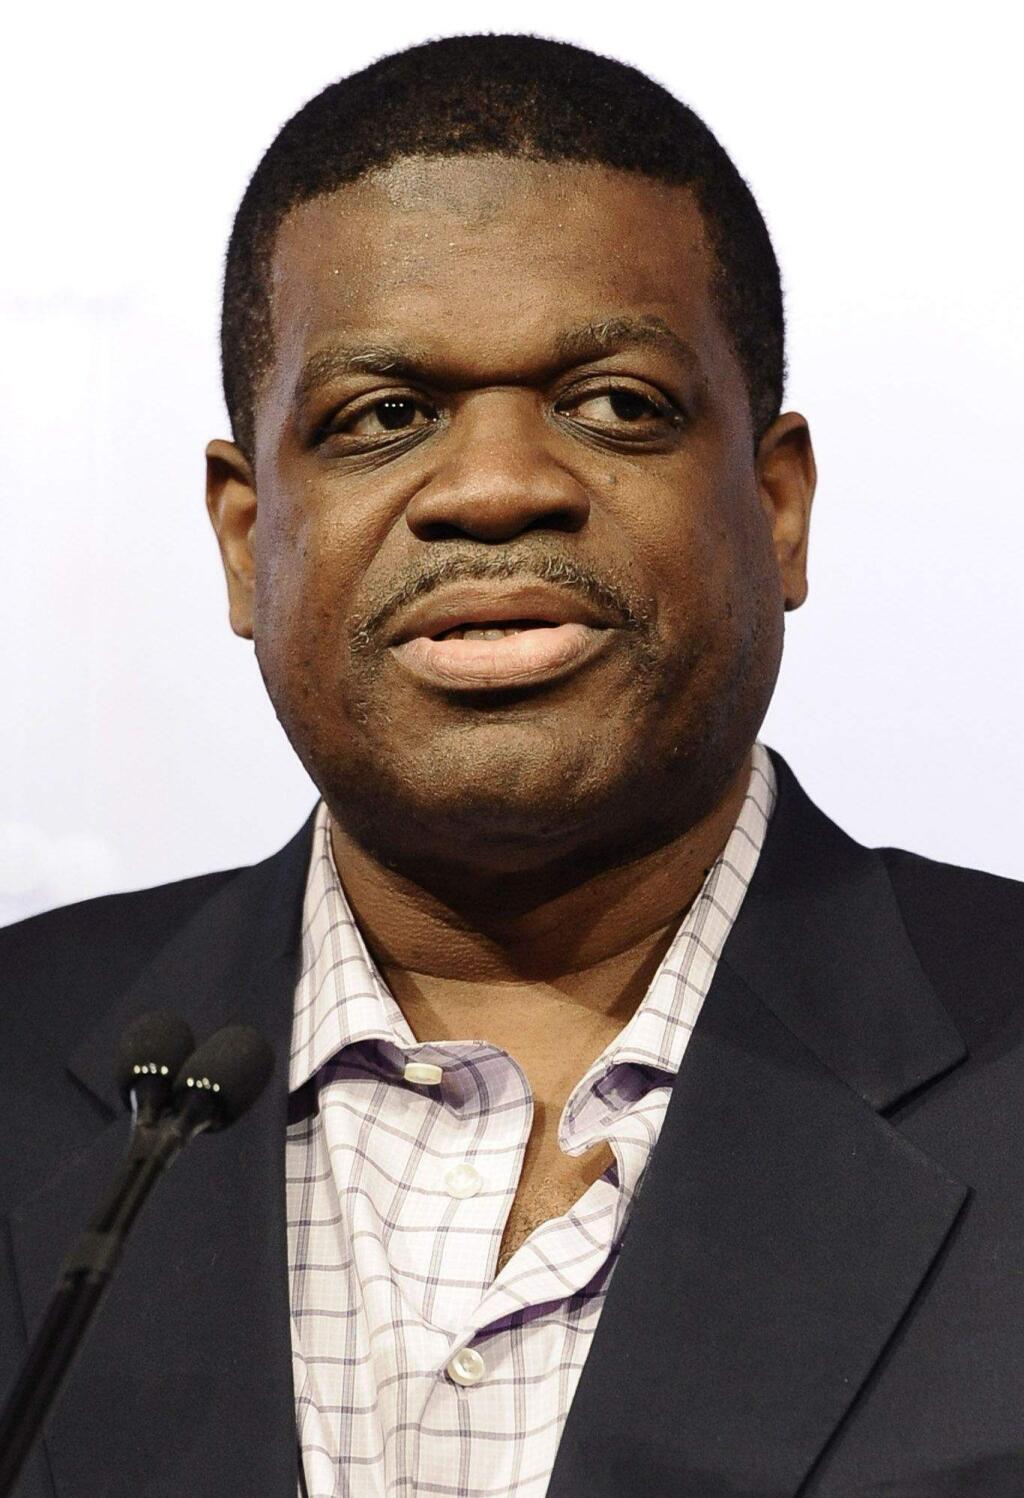 Bernard King, a member of the 2013 class of inductees into the Basketball Hall of Fame, smiles during a news conference at the Naismith Memorial Basketball Hall of Fame in Springfield, Mass., Saturday, Sept. 7, 2013.(AP Photo/Jessica Hill)